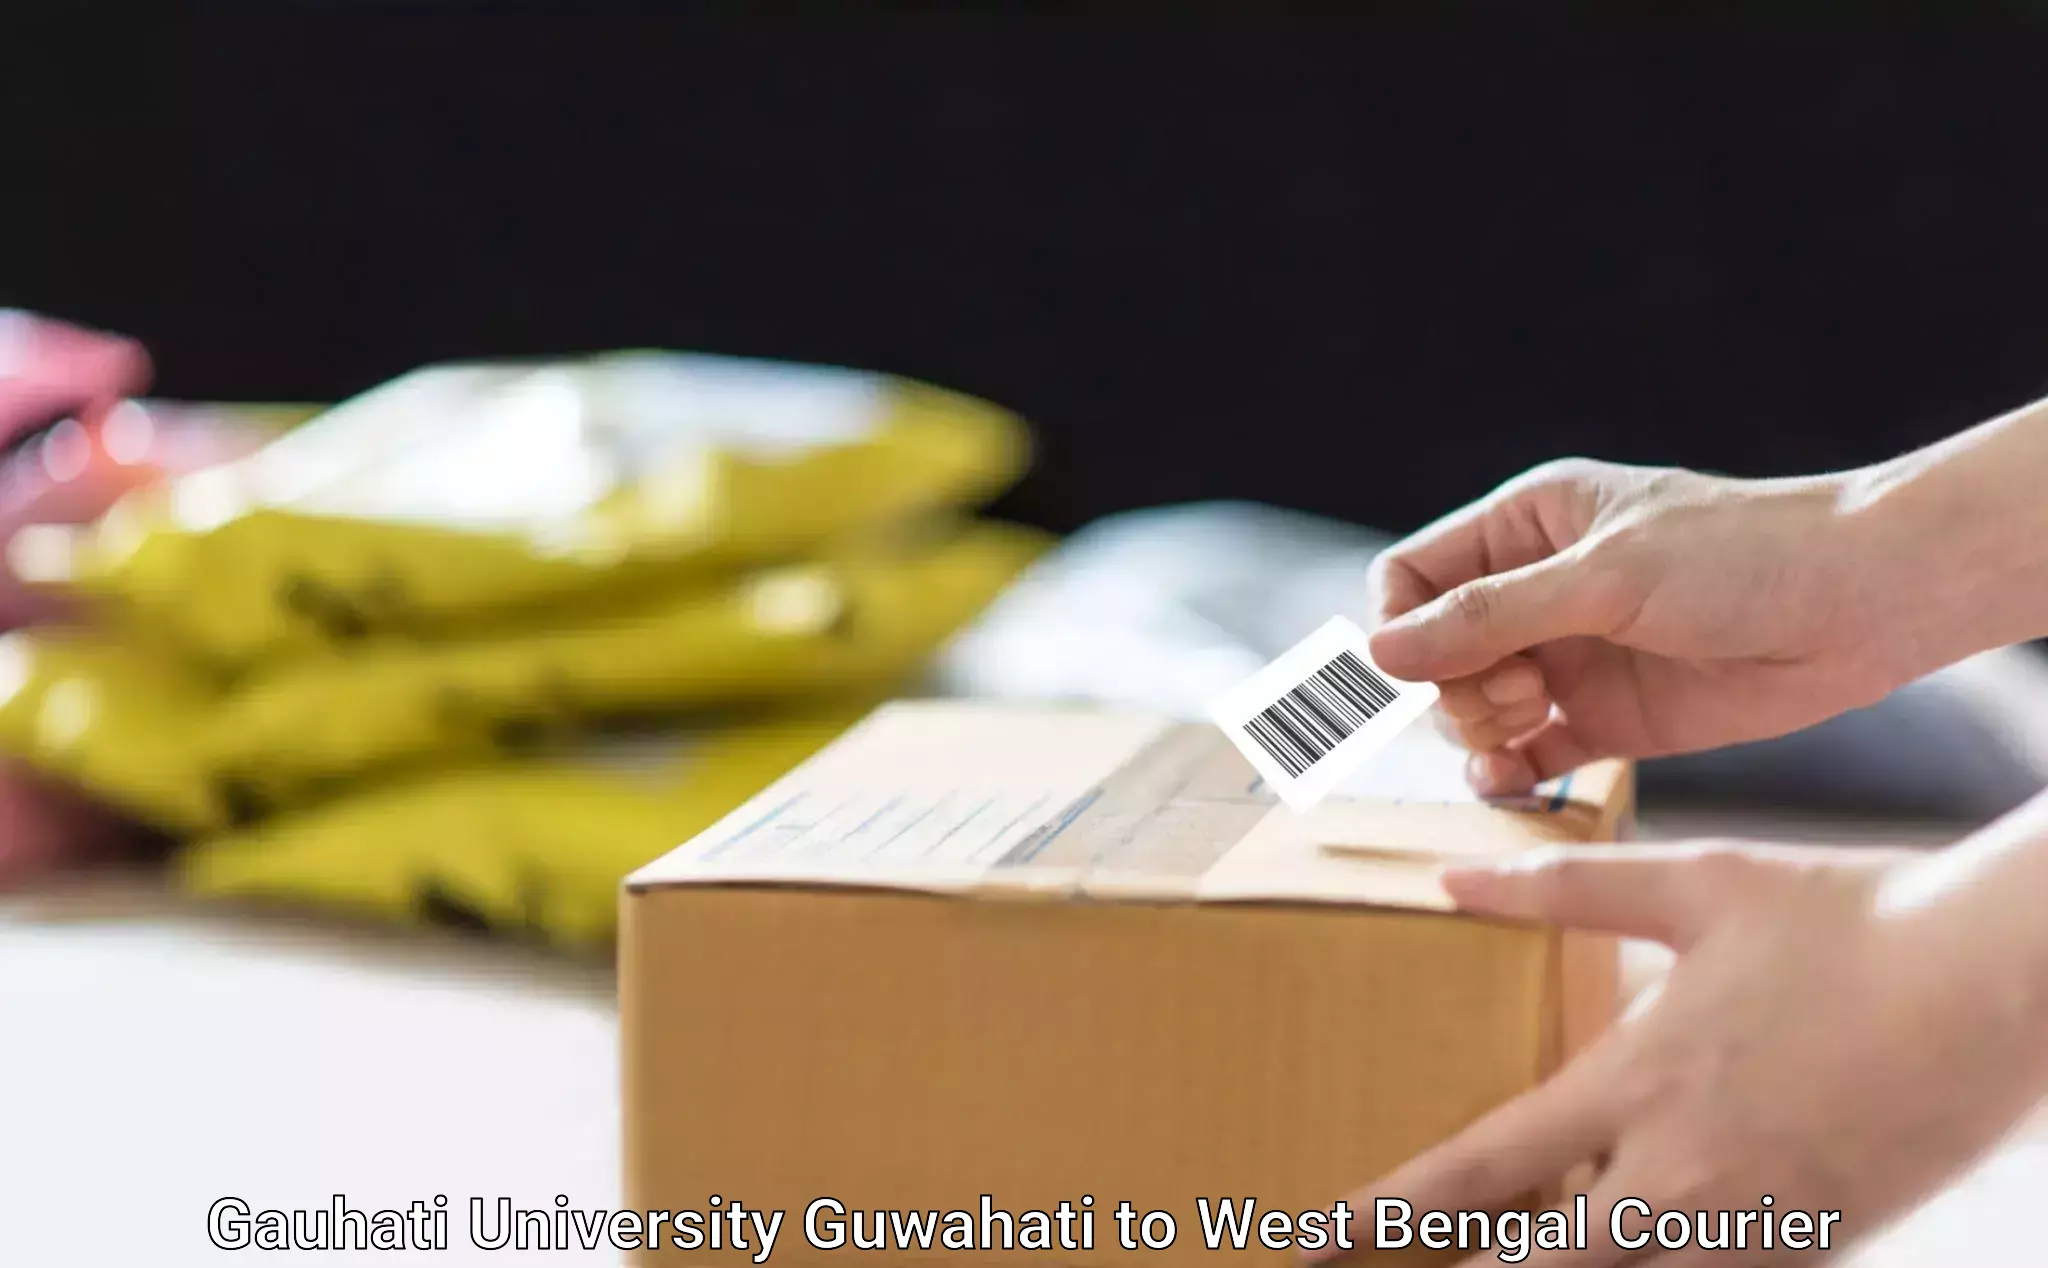 Secure package delivery Gauhati University Guwahati to Sonada